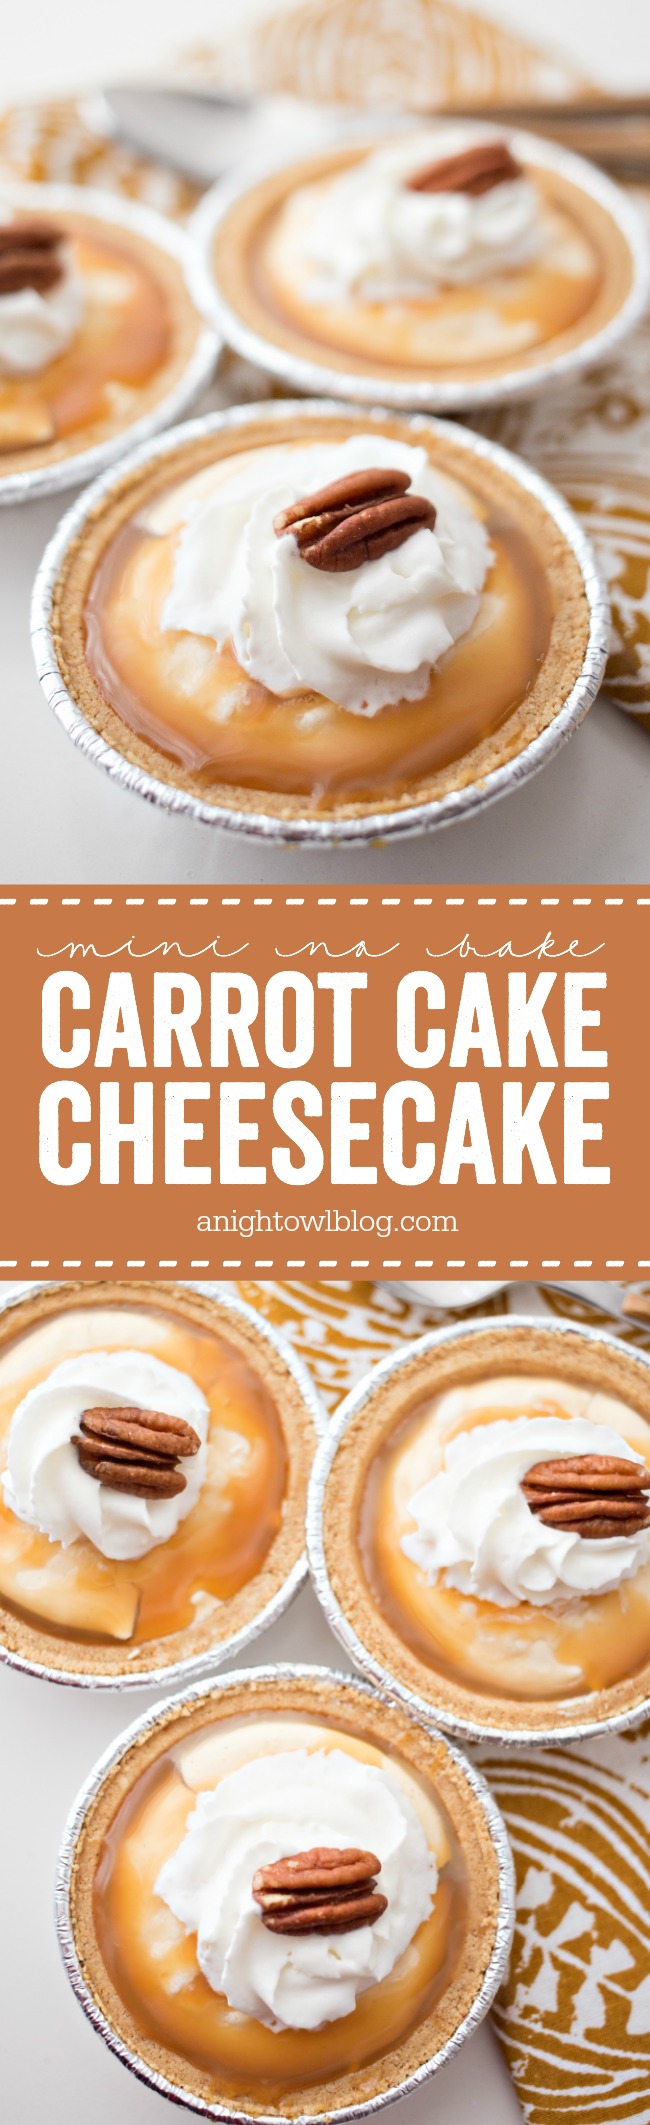 With a hint of delicious carrot cake in a sweet little treat, this Mini No-Bake Carrot Cake Cheesecake recipe is perfect for Easter!